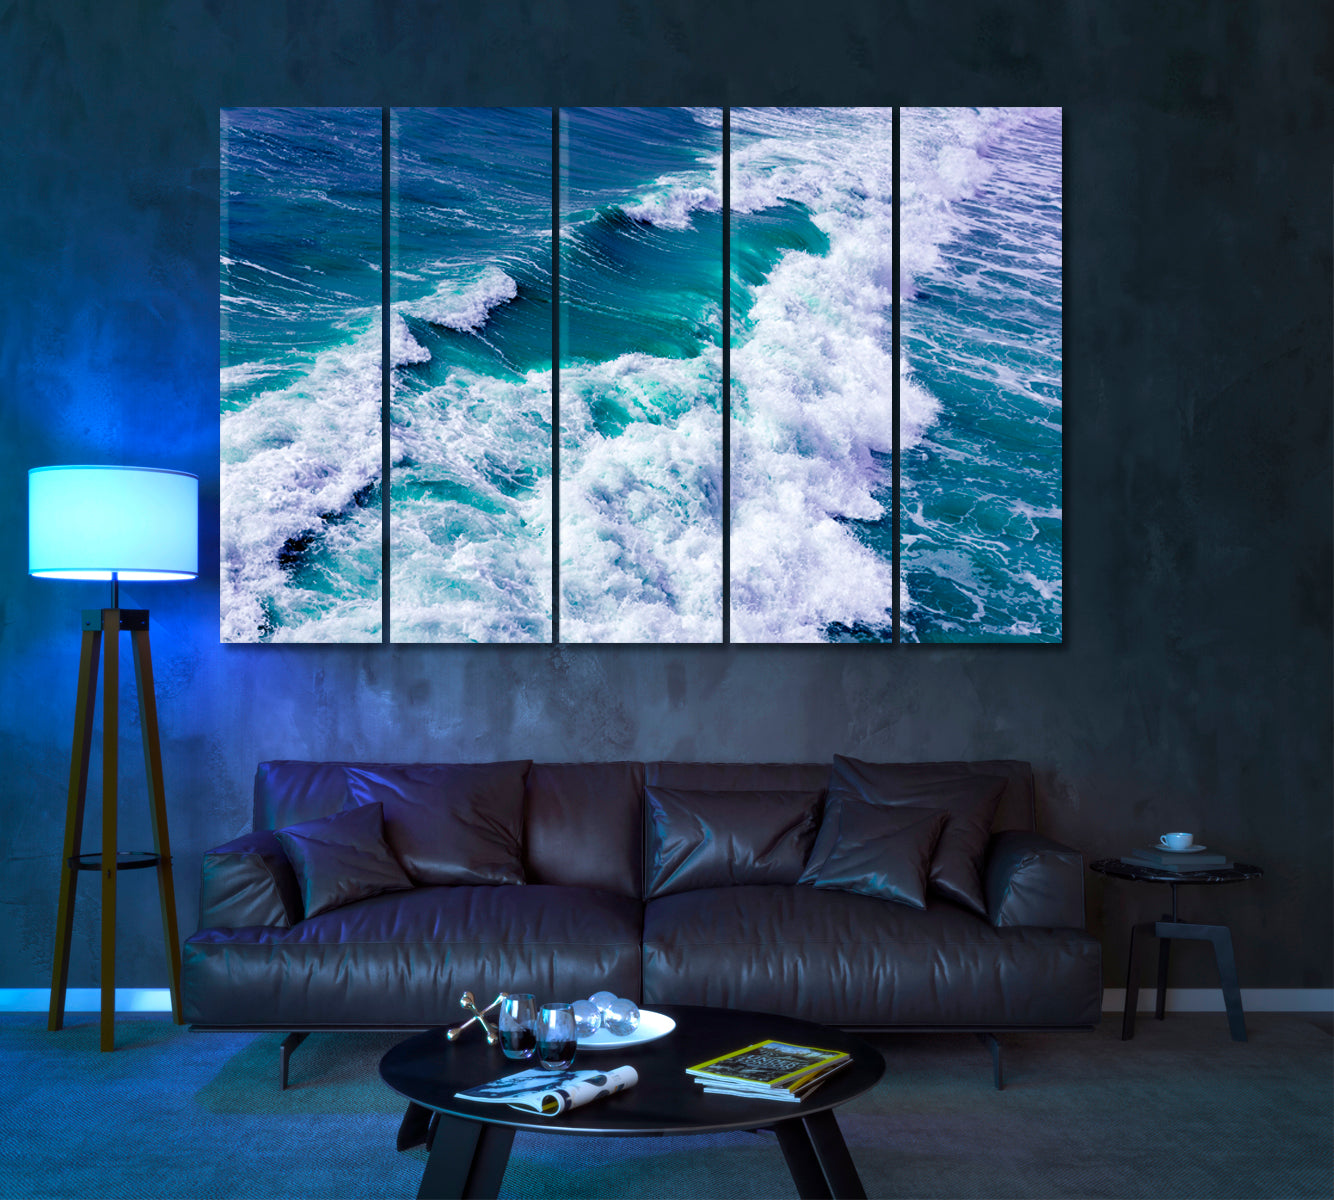 Ocean Waves Canvas Print ArtLexy 5 Panels 36"x24" inches 